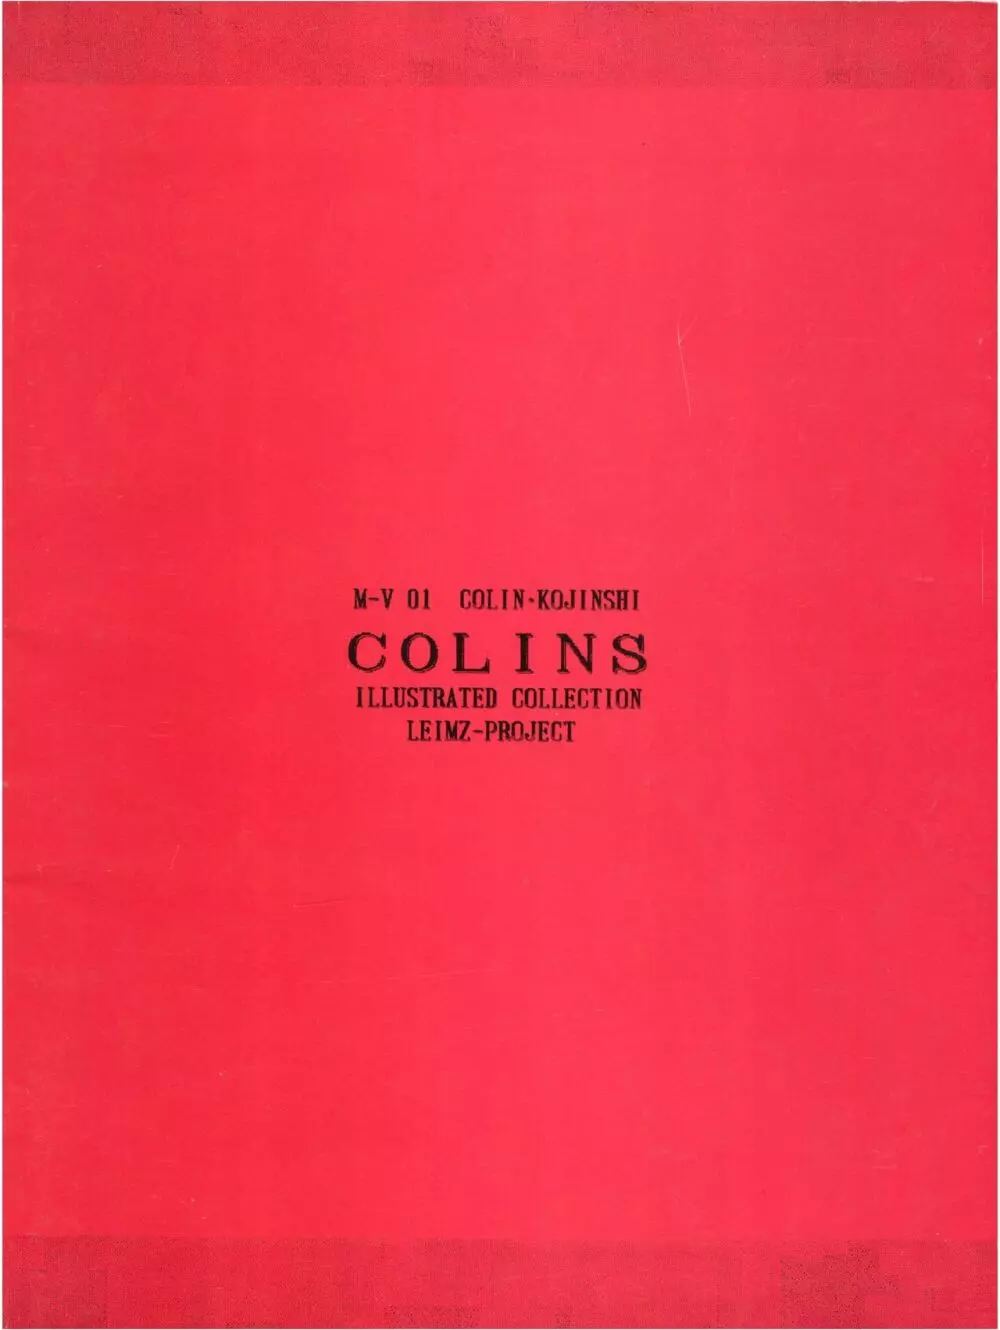 COLINS ILLUSTRATED COLLECTION 52ページ